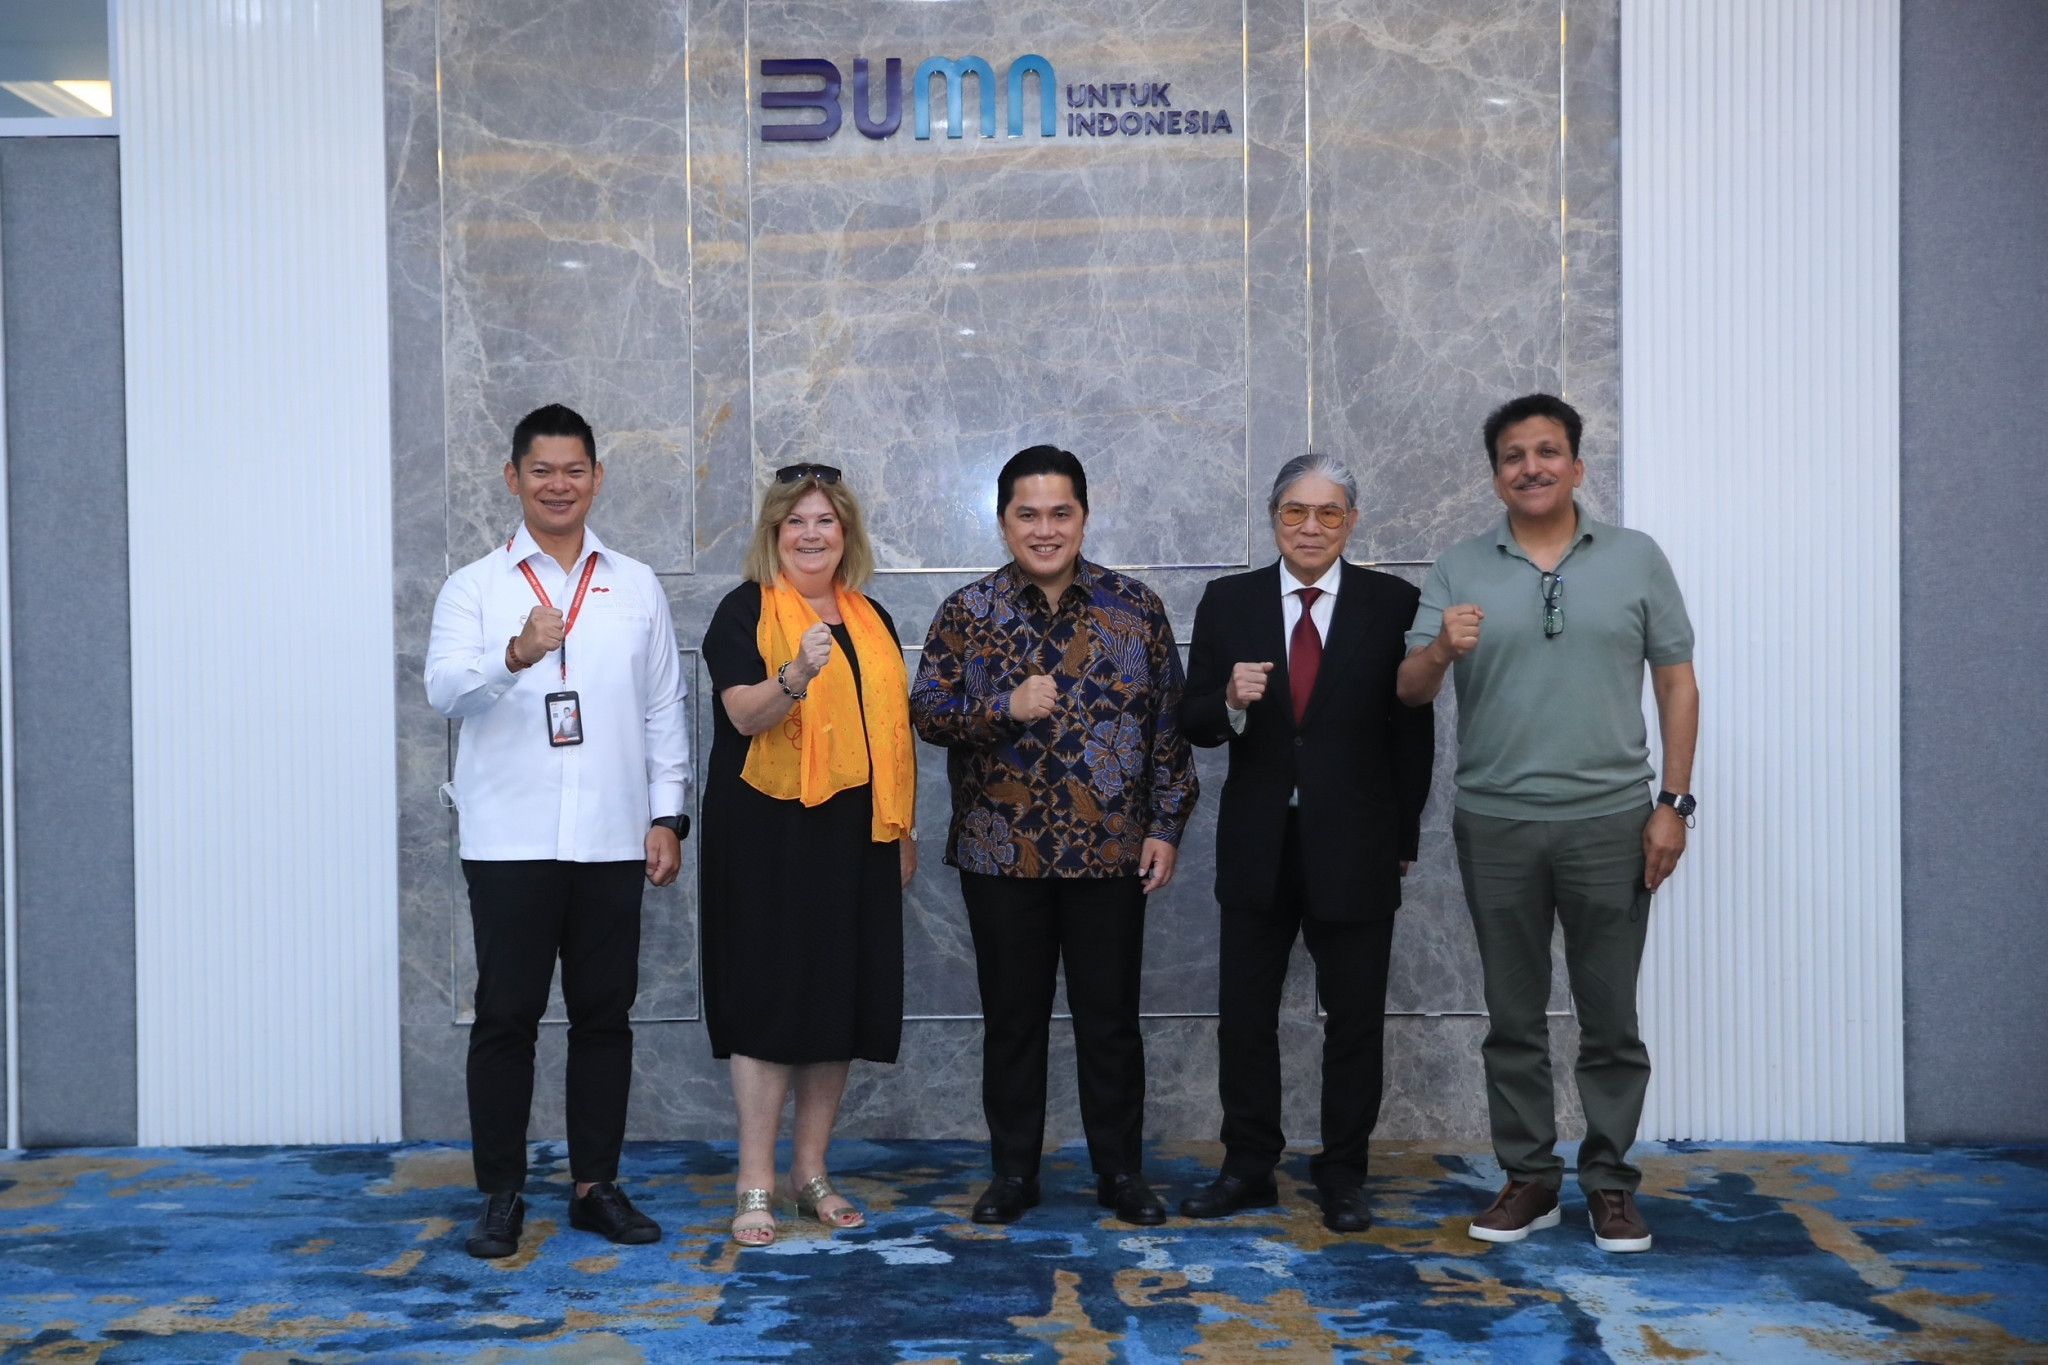 Gunilla Lindberg, second to left, was one of the leading members of the delegation to Bali and Jakarta ©NOC Indonesia Naif Al’As